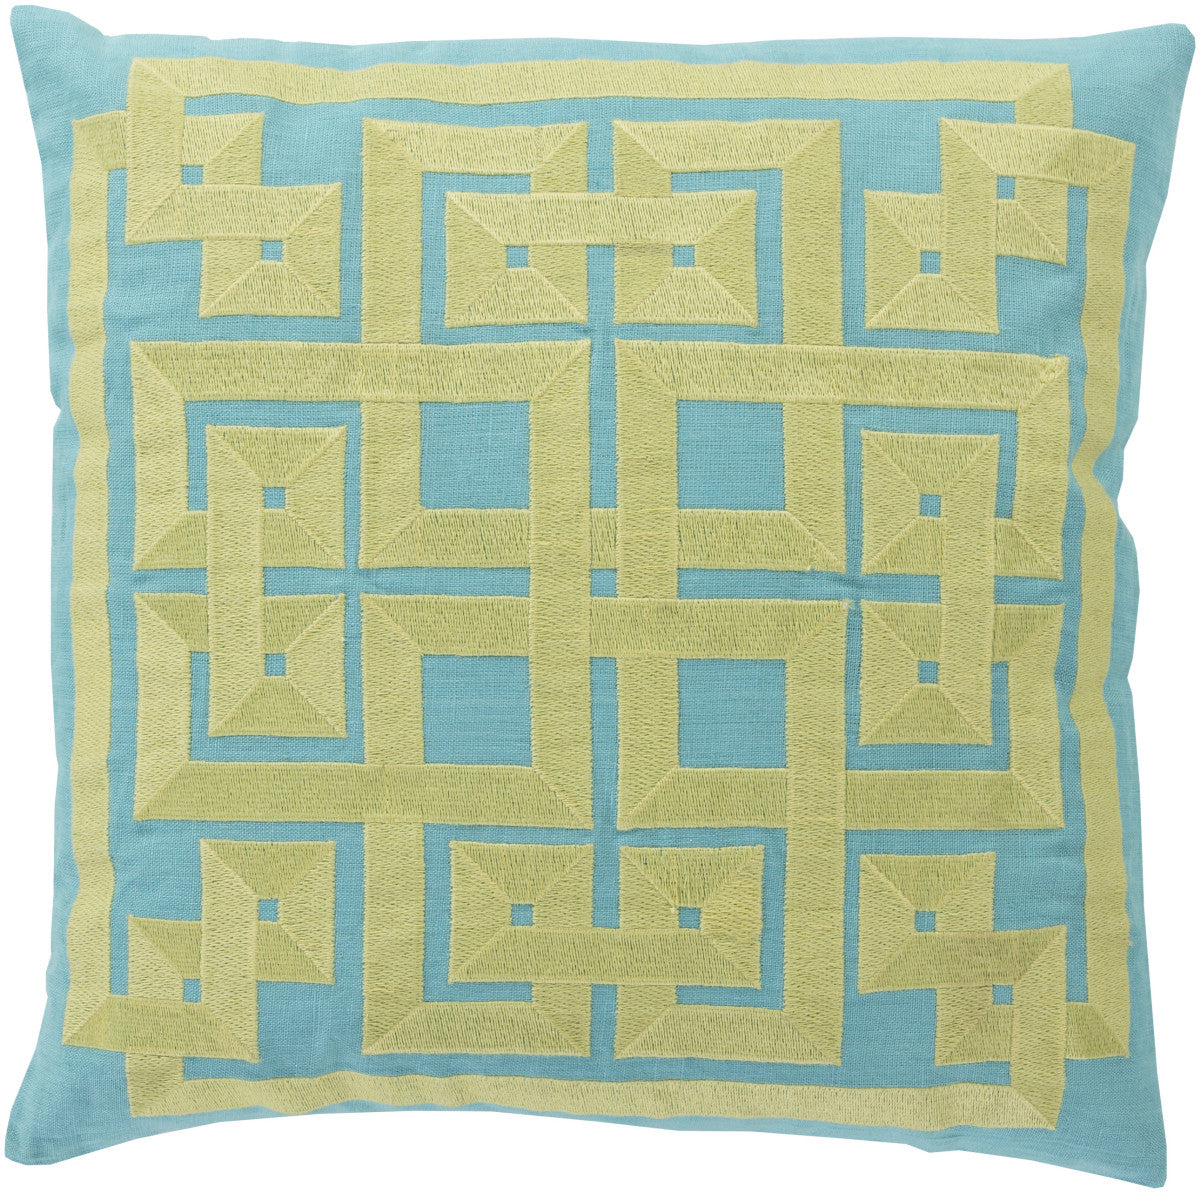 Surya Gramercy Intersected Geometrics LD-011 Pillow by Beth Lacefield